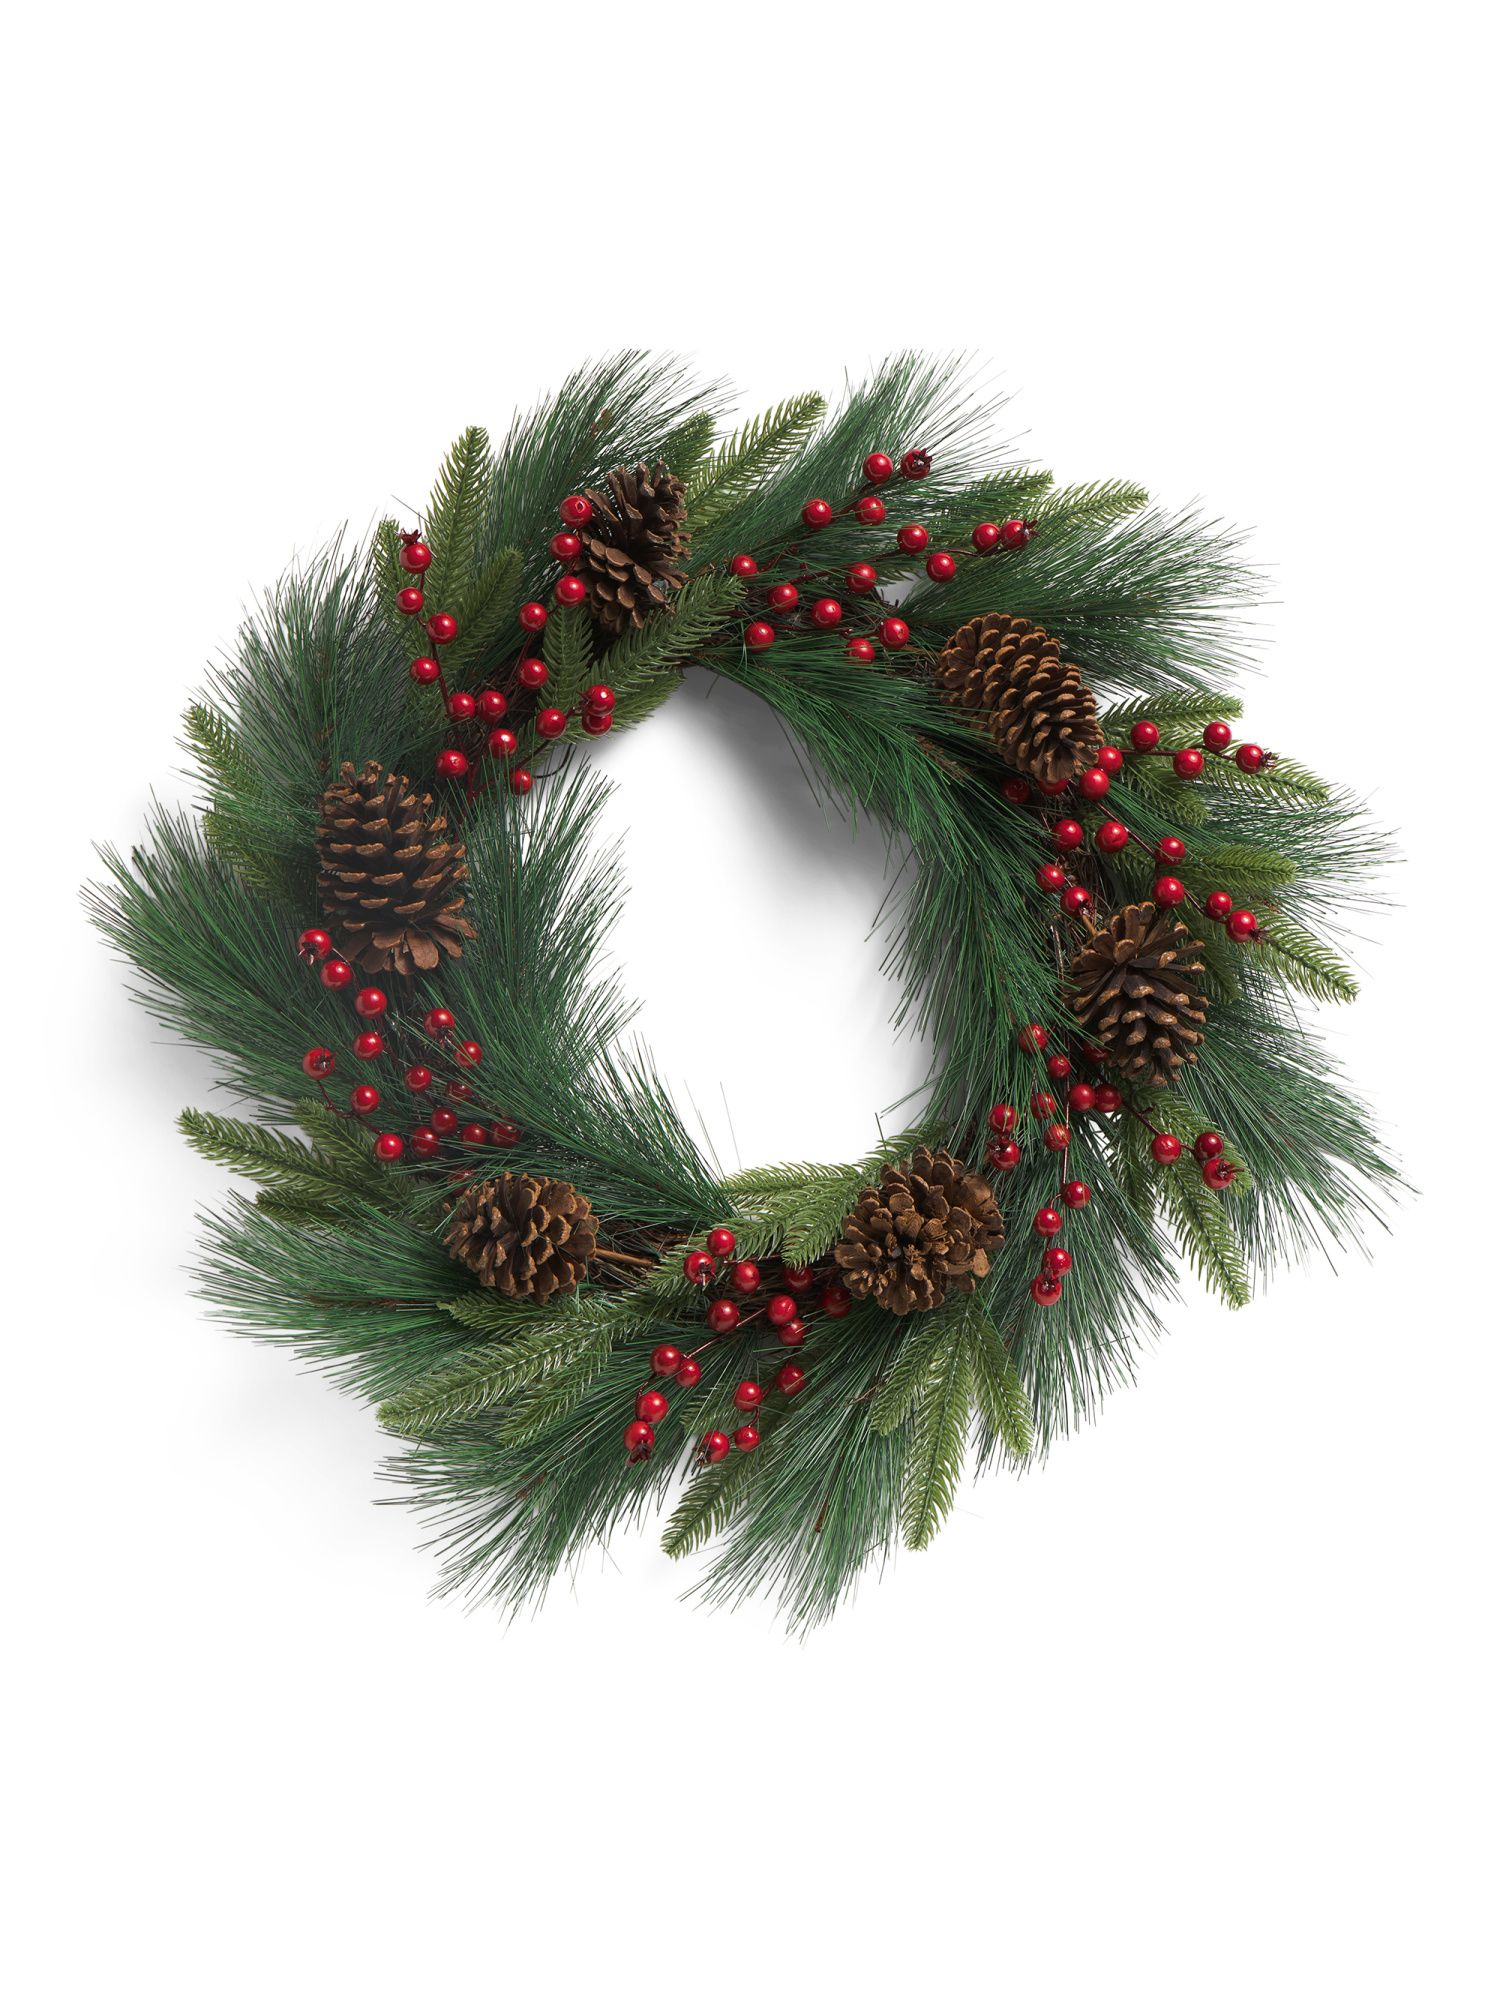 24in Pine Wreath With Berries And Pinecones | TJ Maxx